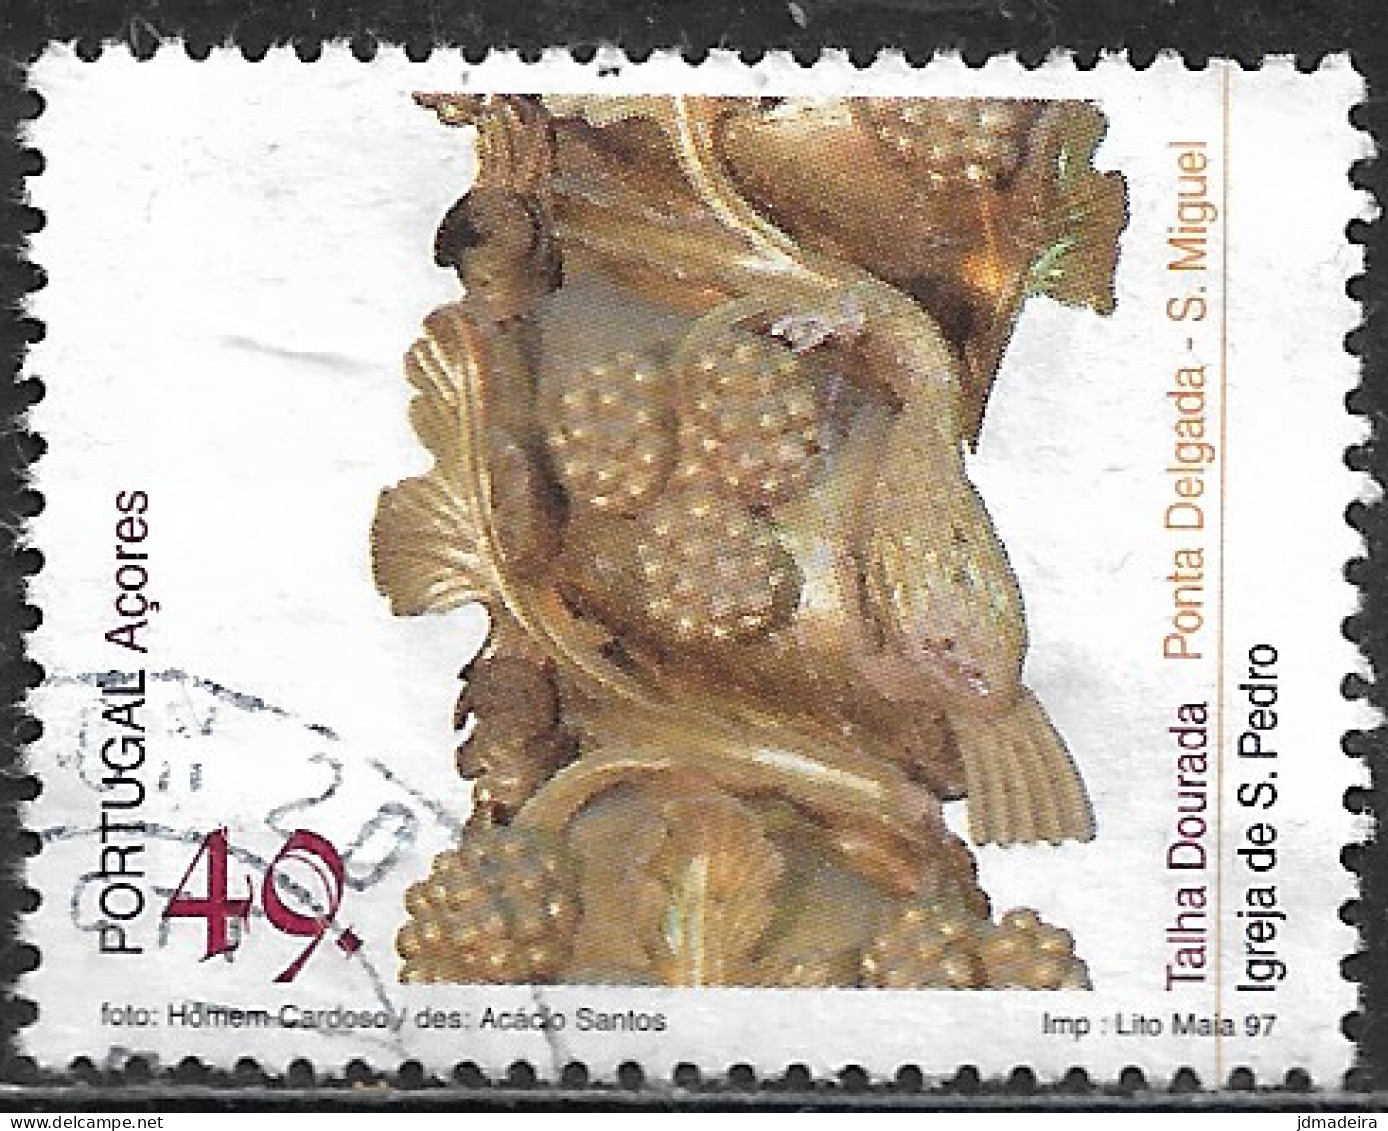 Portugal – 1997 Gold Carving 49. Used Stamp - Gebraucht